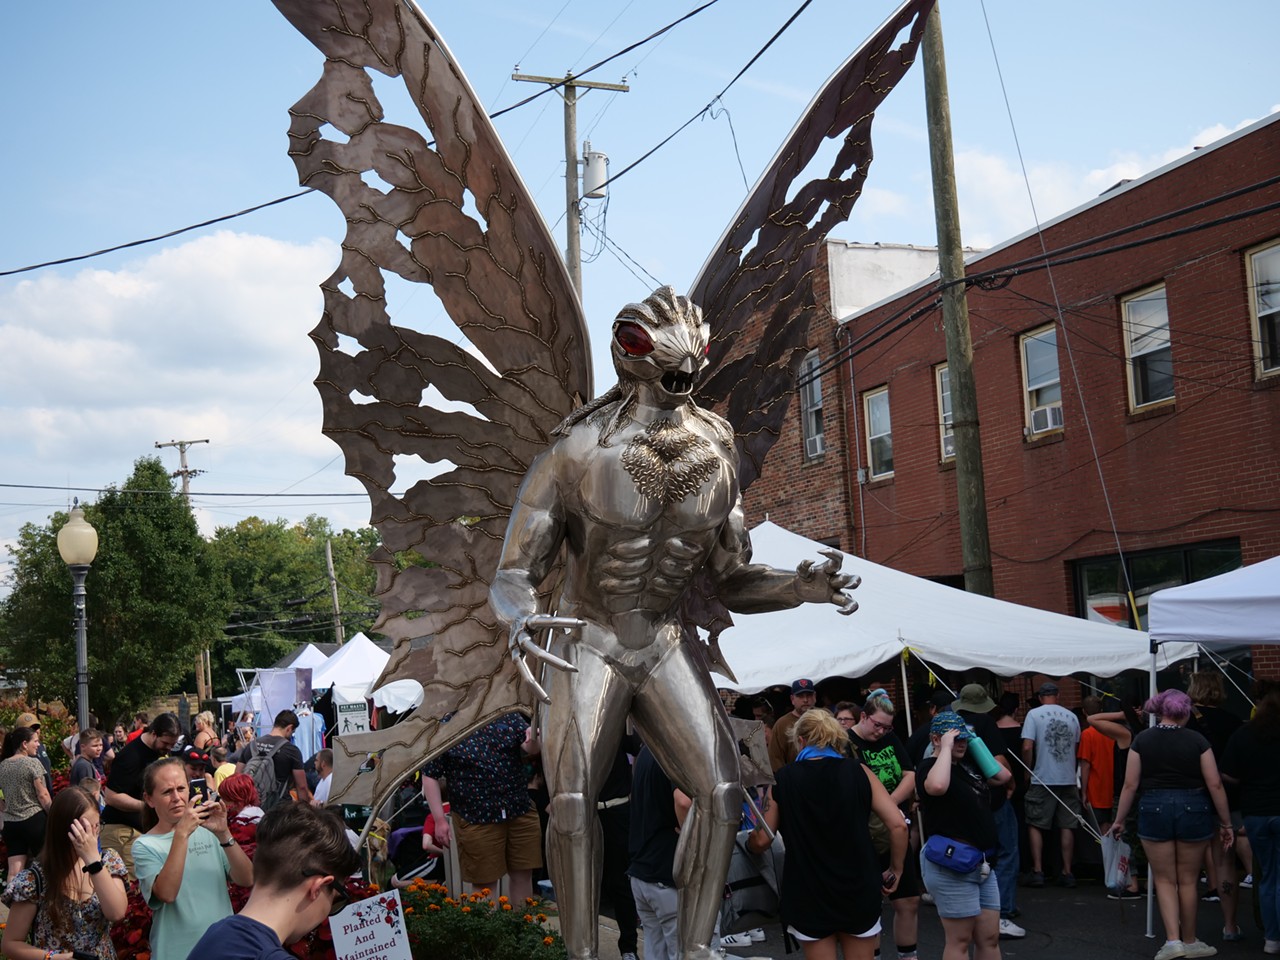 Everything We Saw at the Mothman Festival in Point Pleasant, West